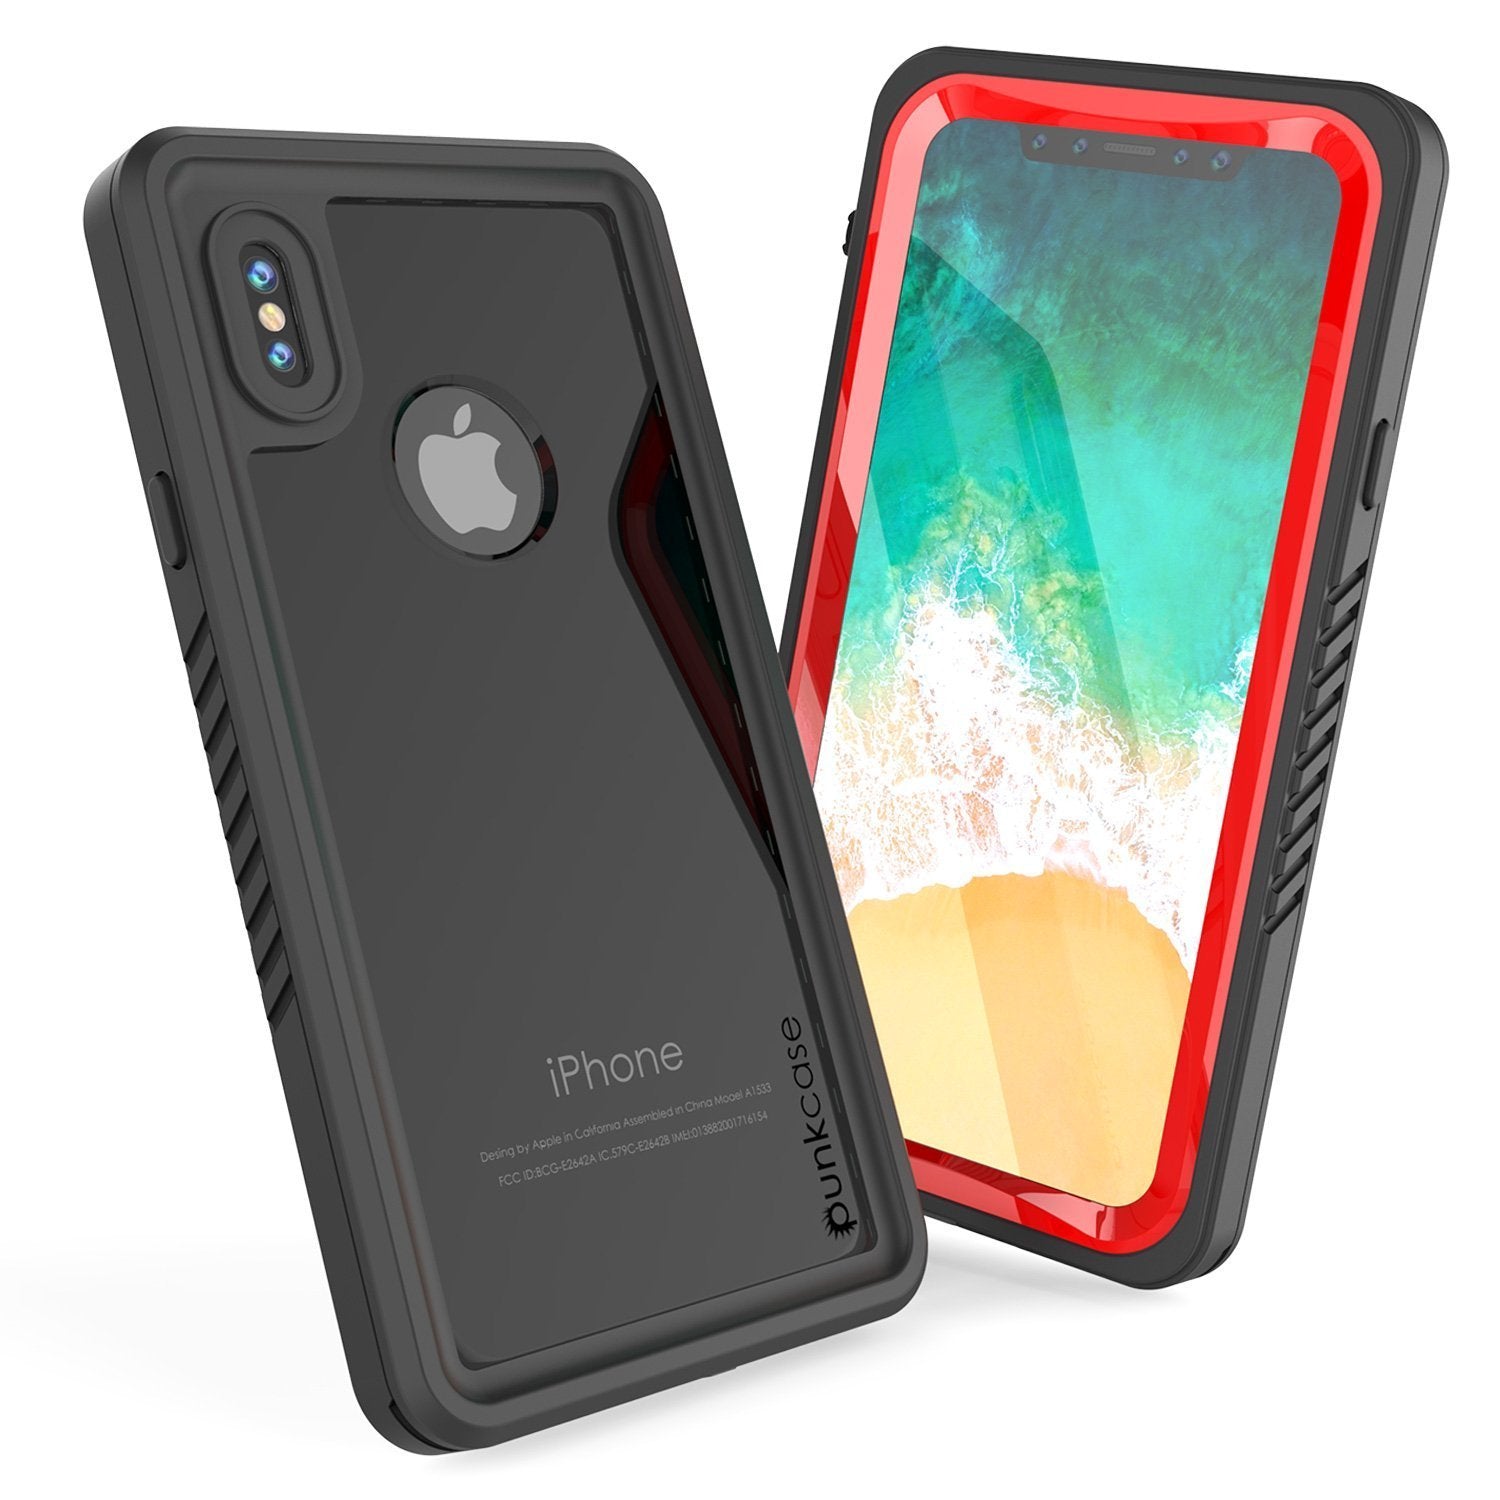 iPhone XS Max Waterproof Case, Punkcase [Extreme Series] Armor Cover W/ Built In Screen Protector [Red]